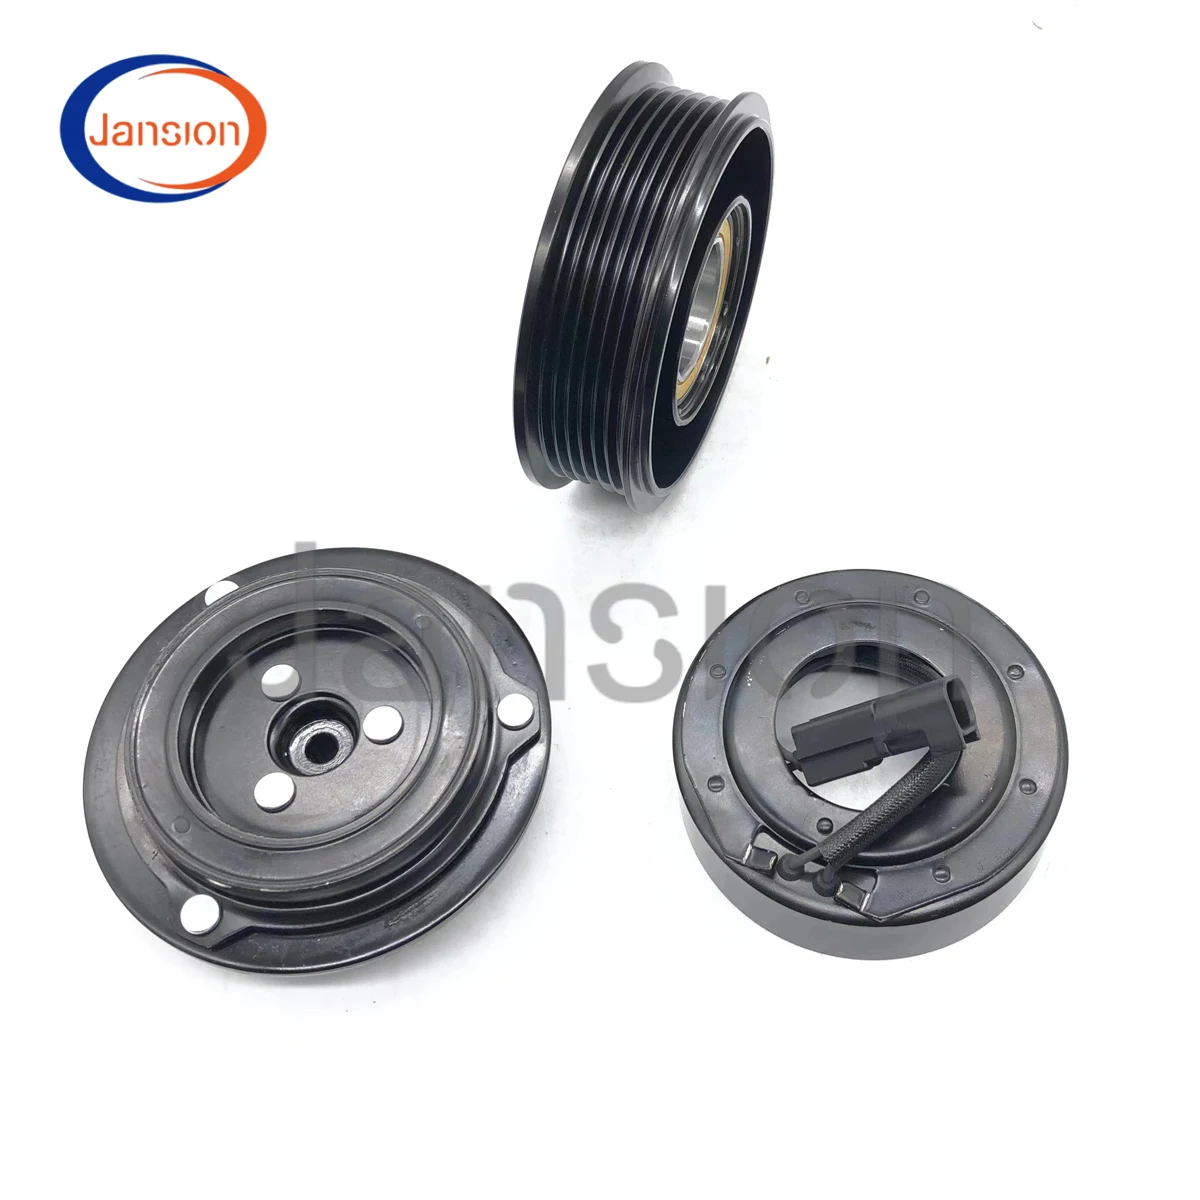 AC A/C Air Conditioning Compressor Clutch Pulley FOR FORD MONDEO 2.0 B-MAX FIESTA C-MAX FOCUS 1.0 ECOBOOST DG9H19D629FF 1758277